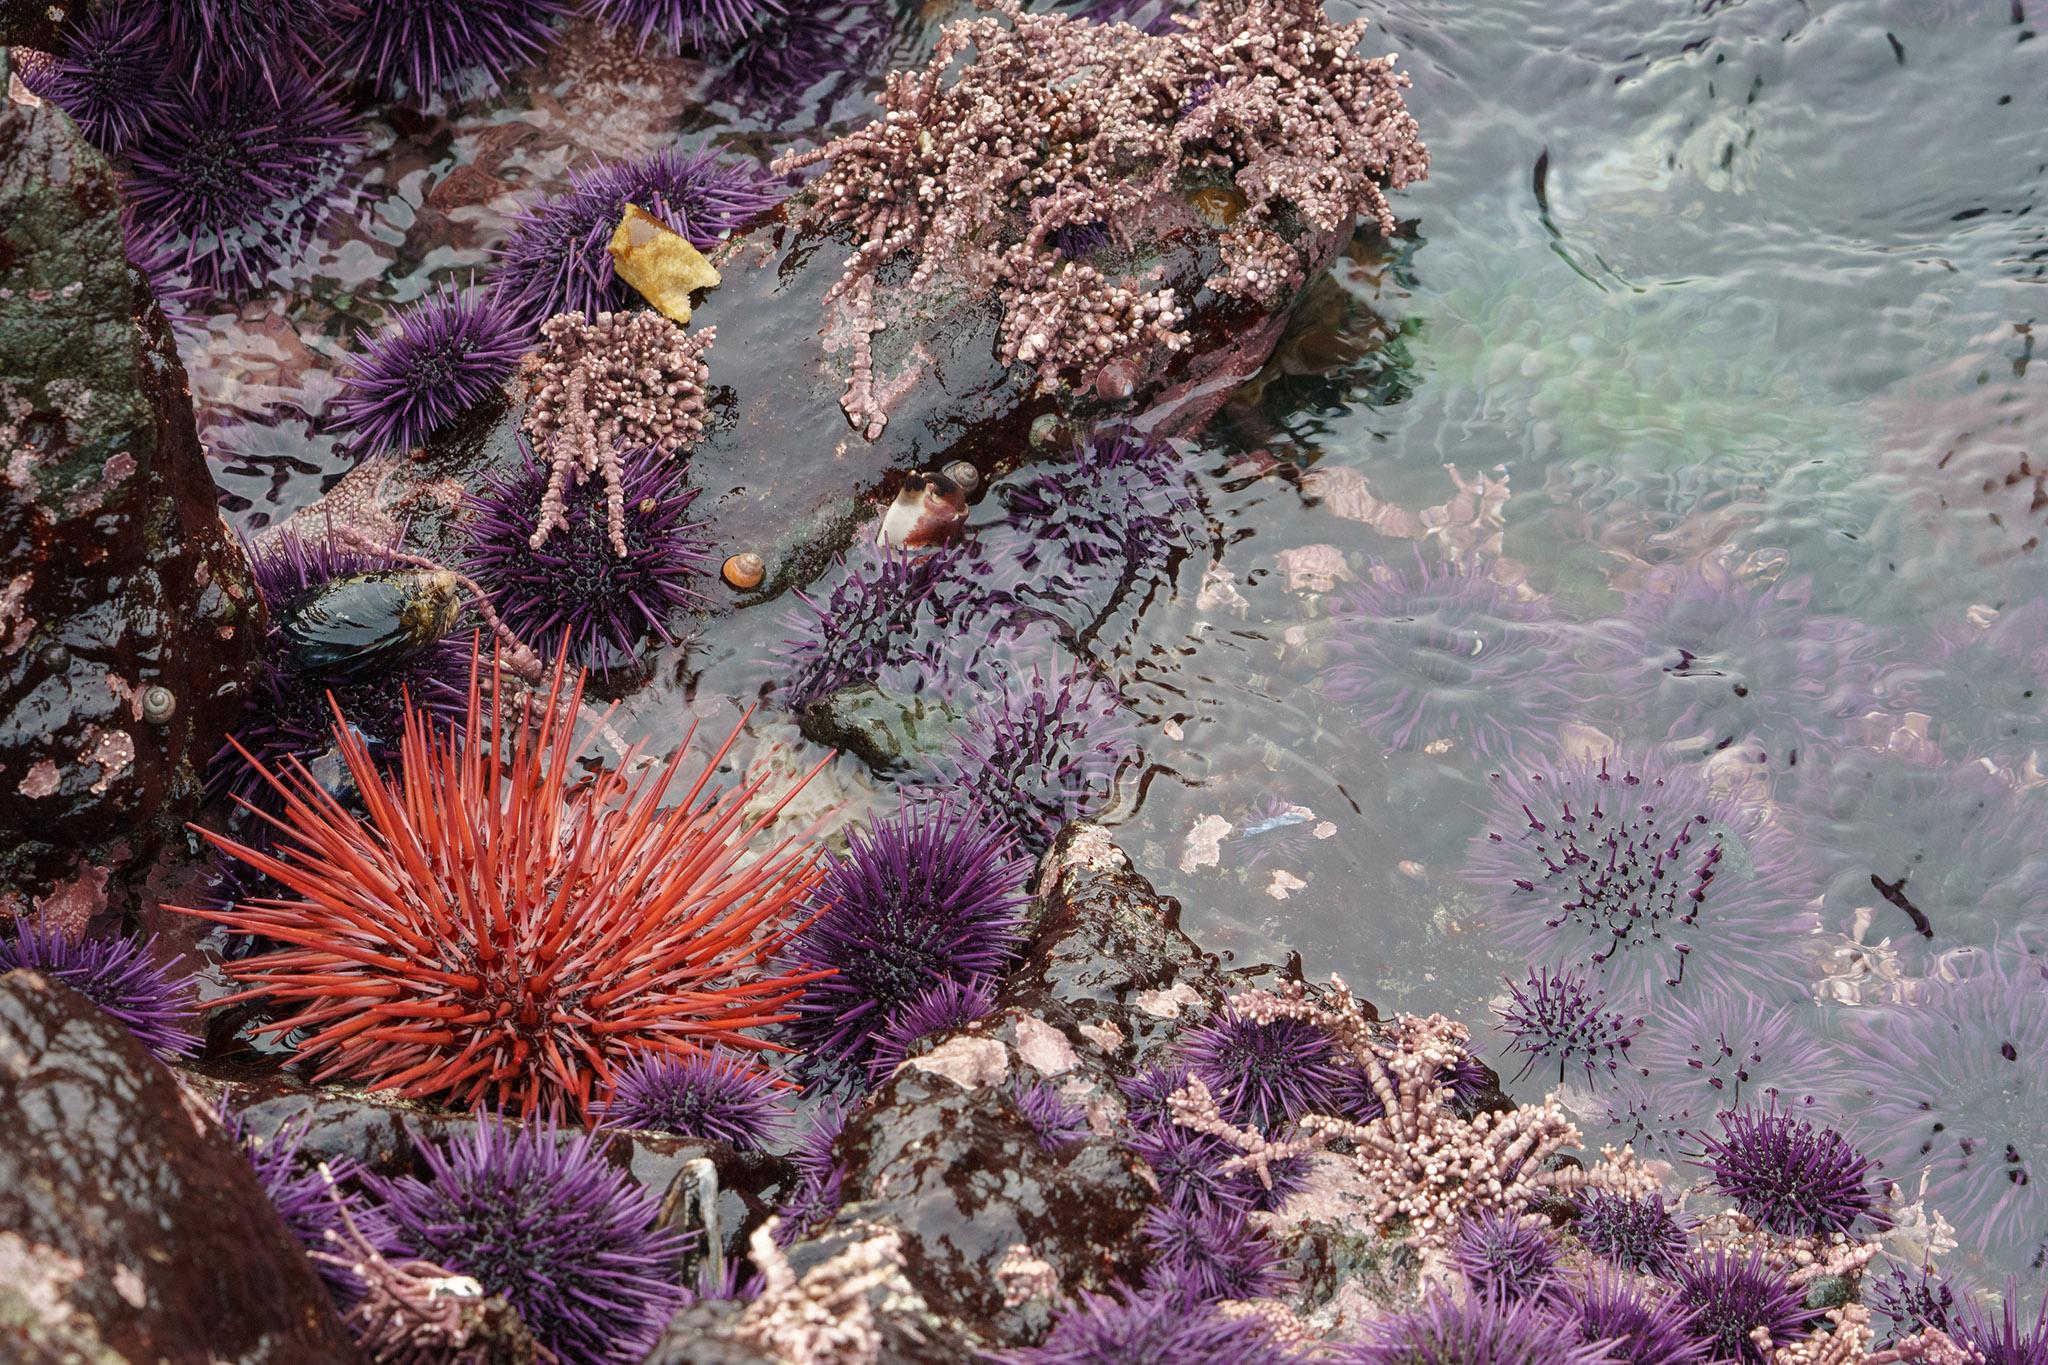 A mysterious sea urchin plague is spreading across continents, according to a new study published in Current Biology